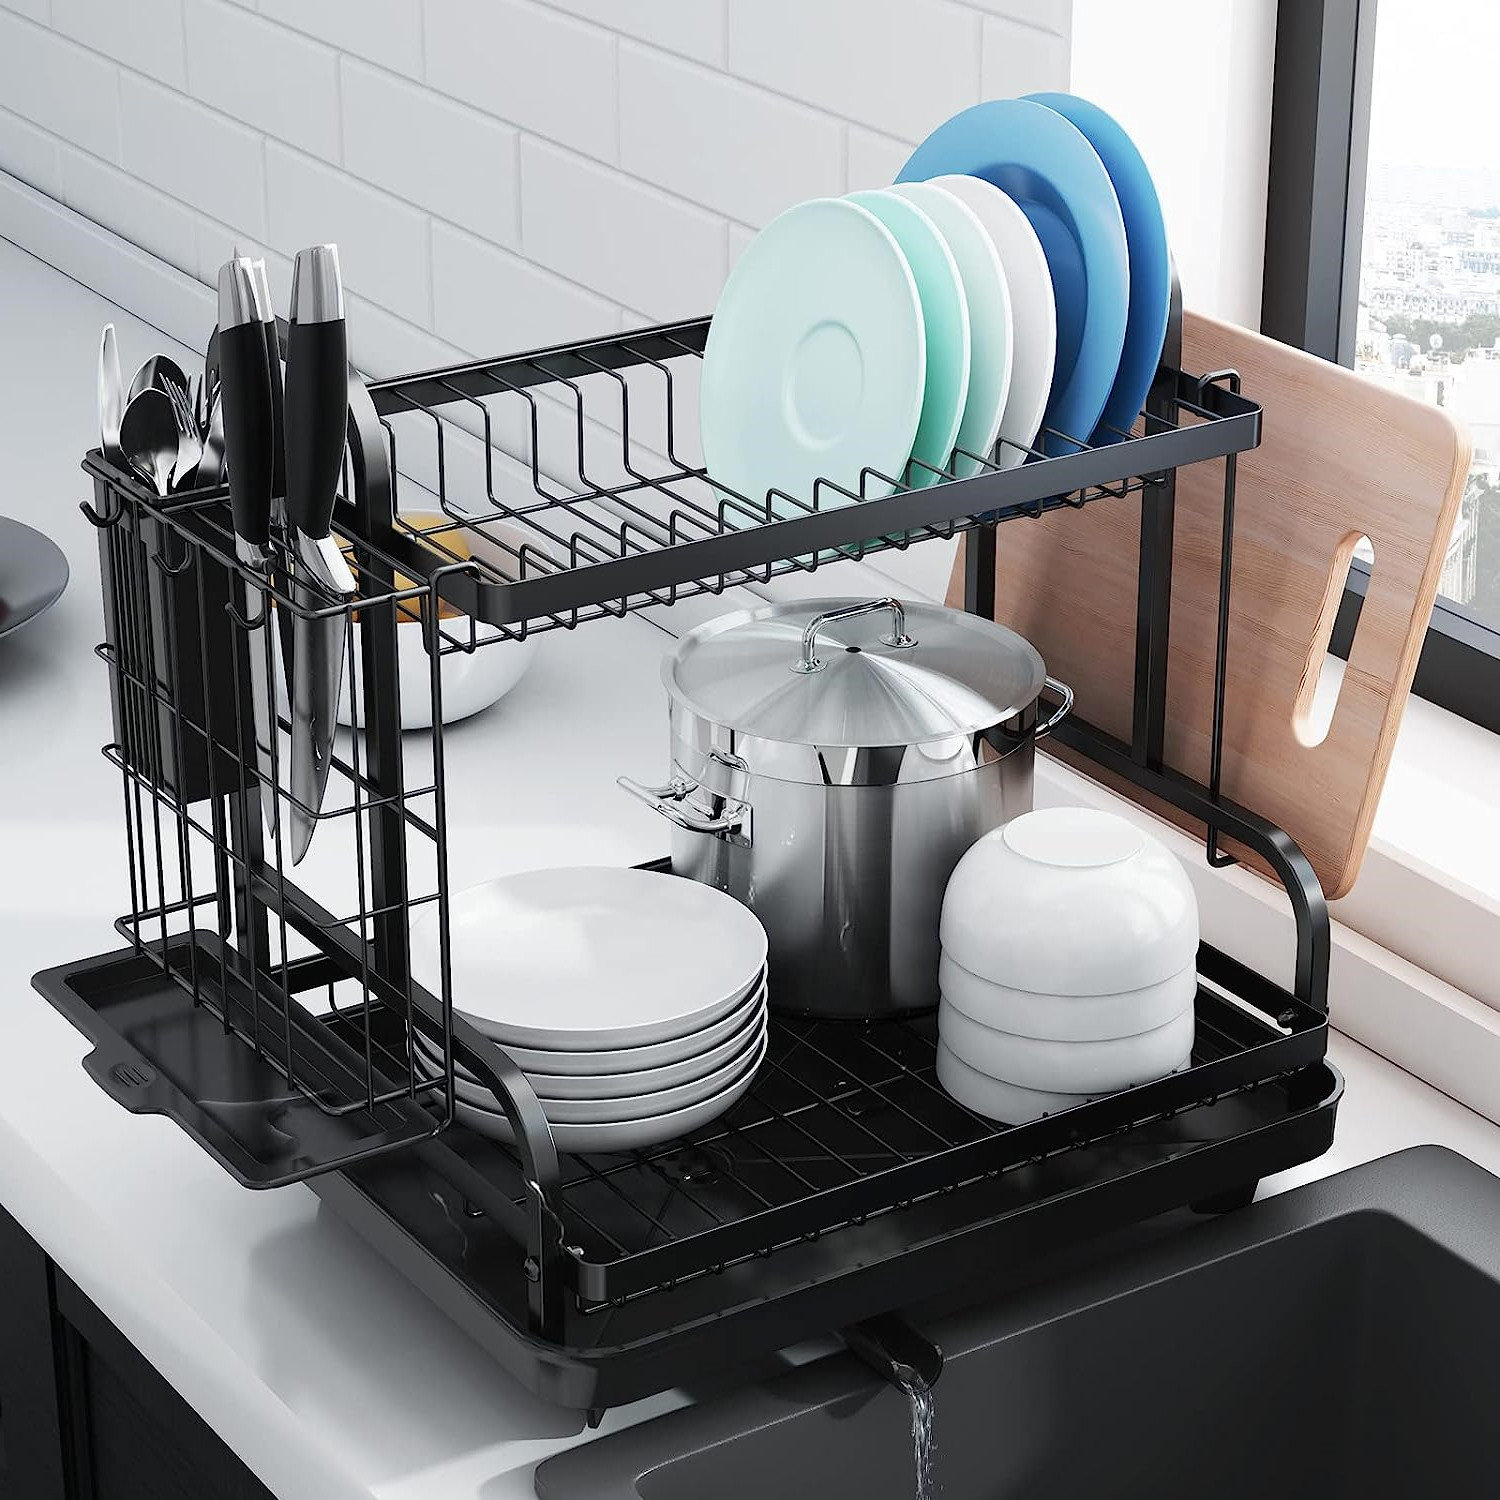 Dish Drying Rack Collapsible 2 Tier Dish Rack and Drainboard Set - Black